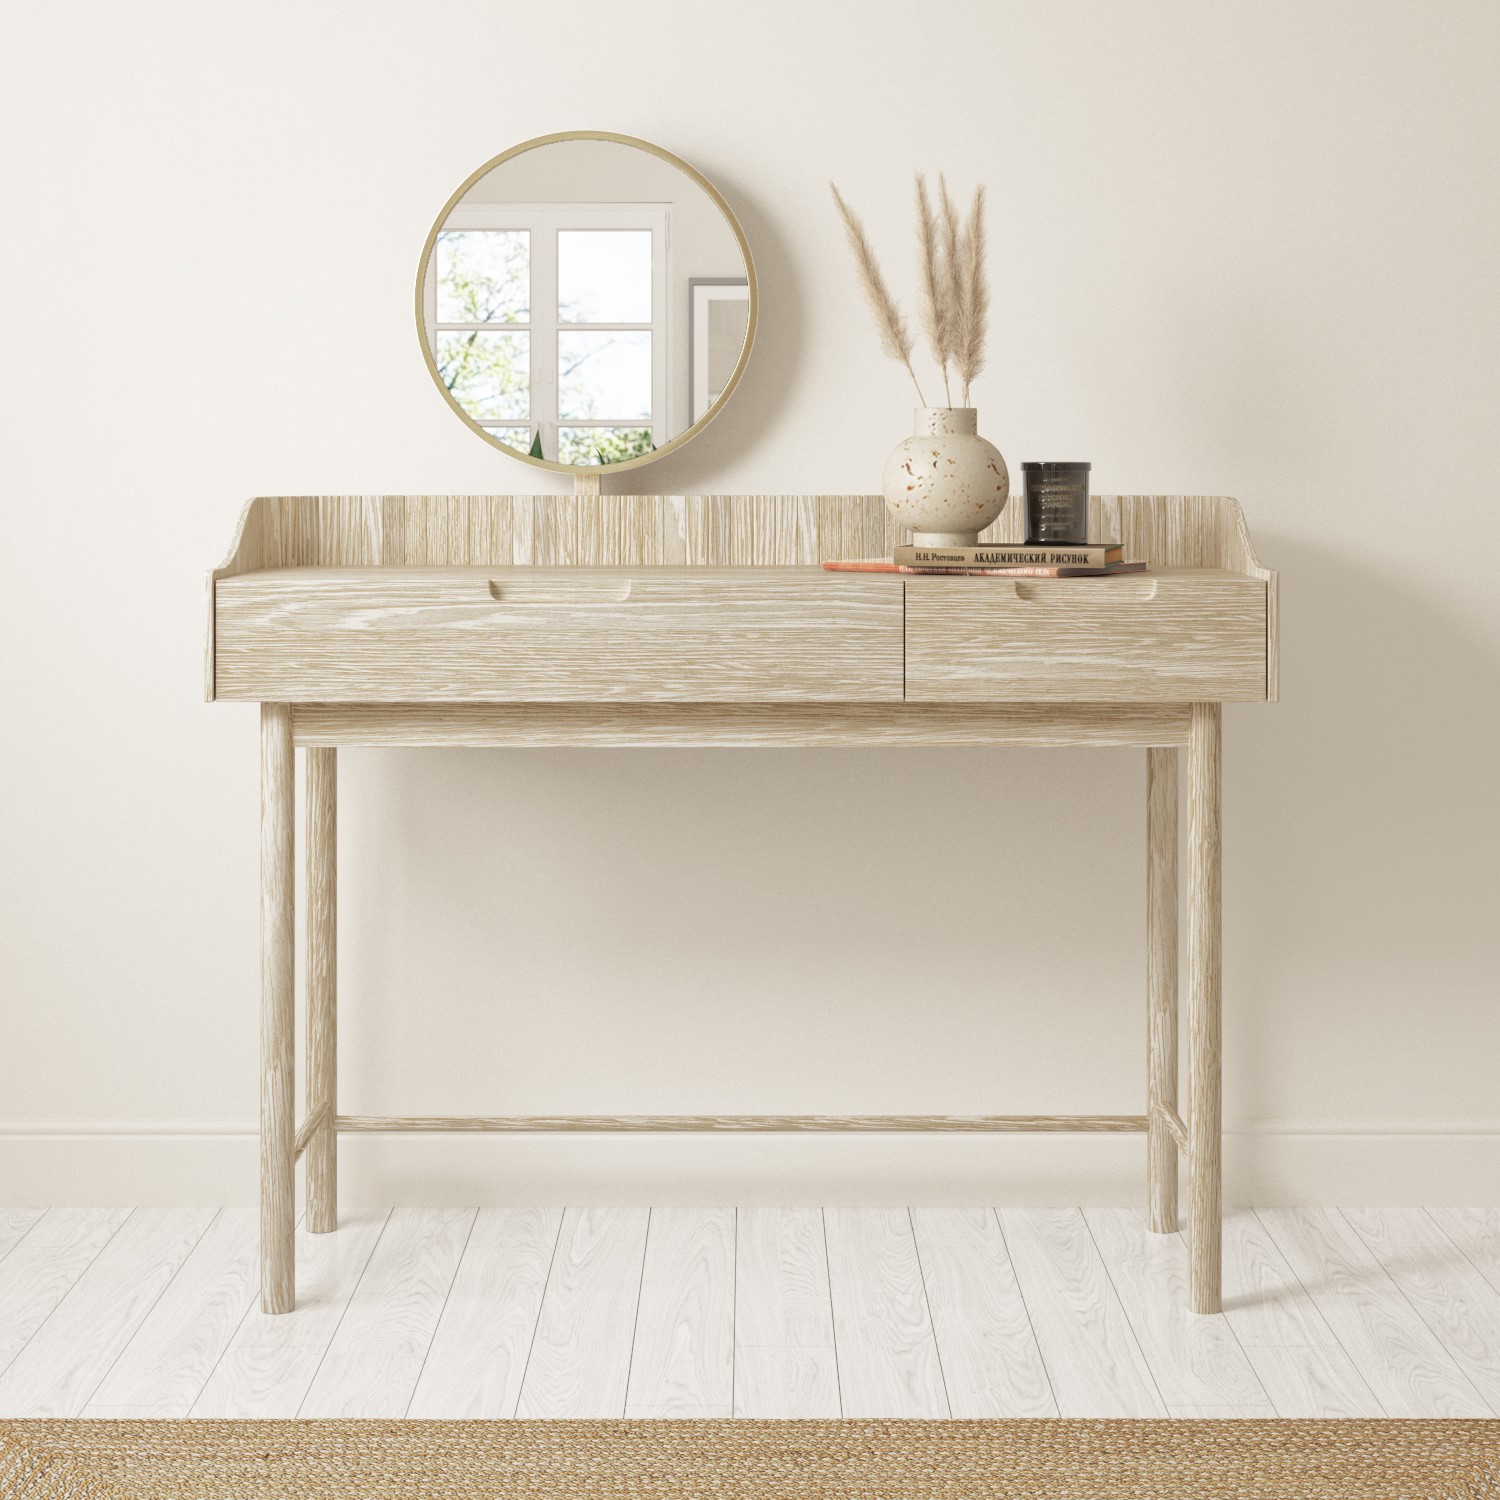 Photo of Light wood mid-century modern dressing table with mirror and drawers - saskia